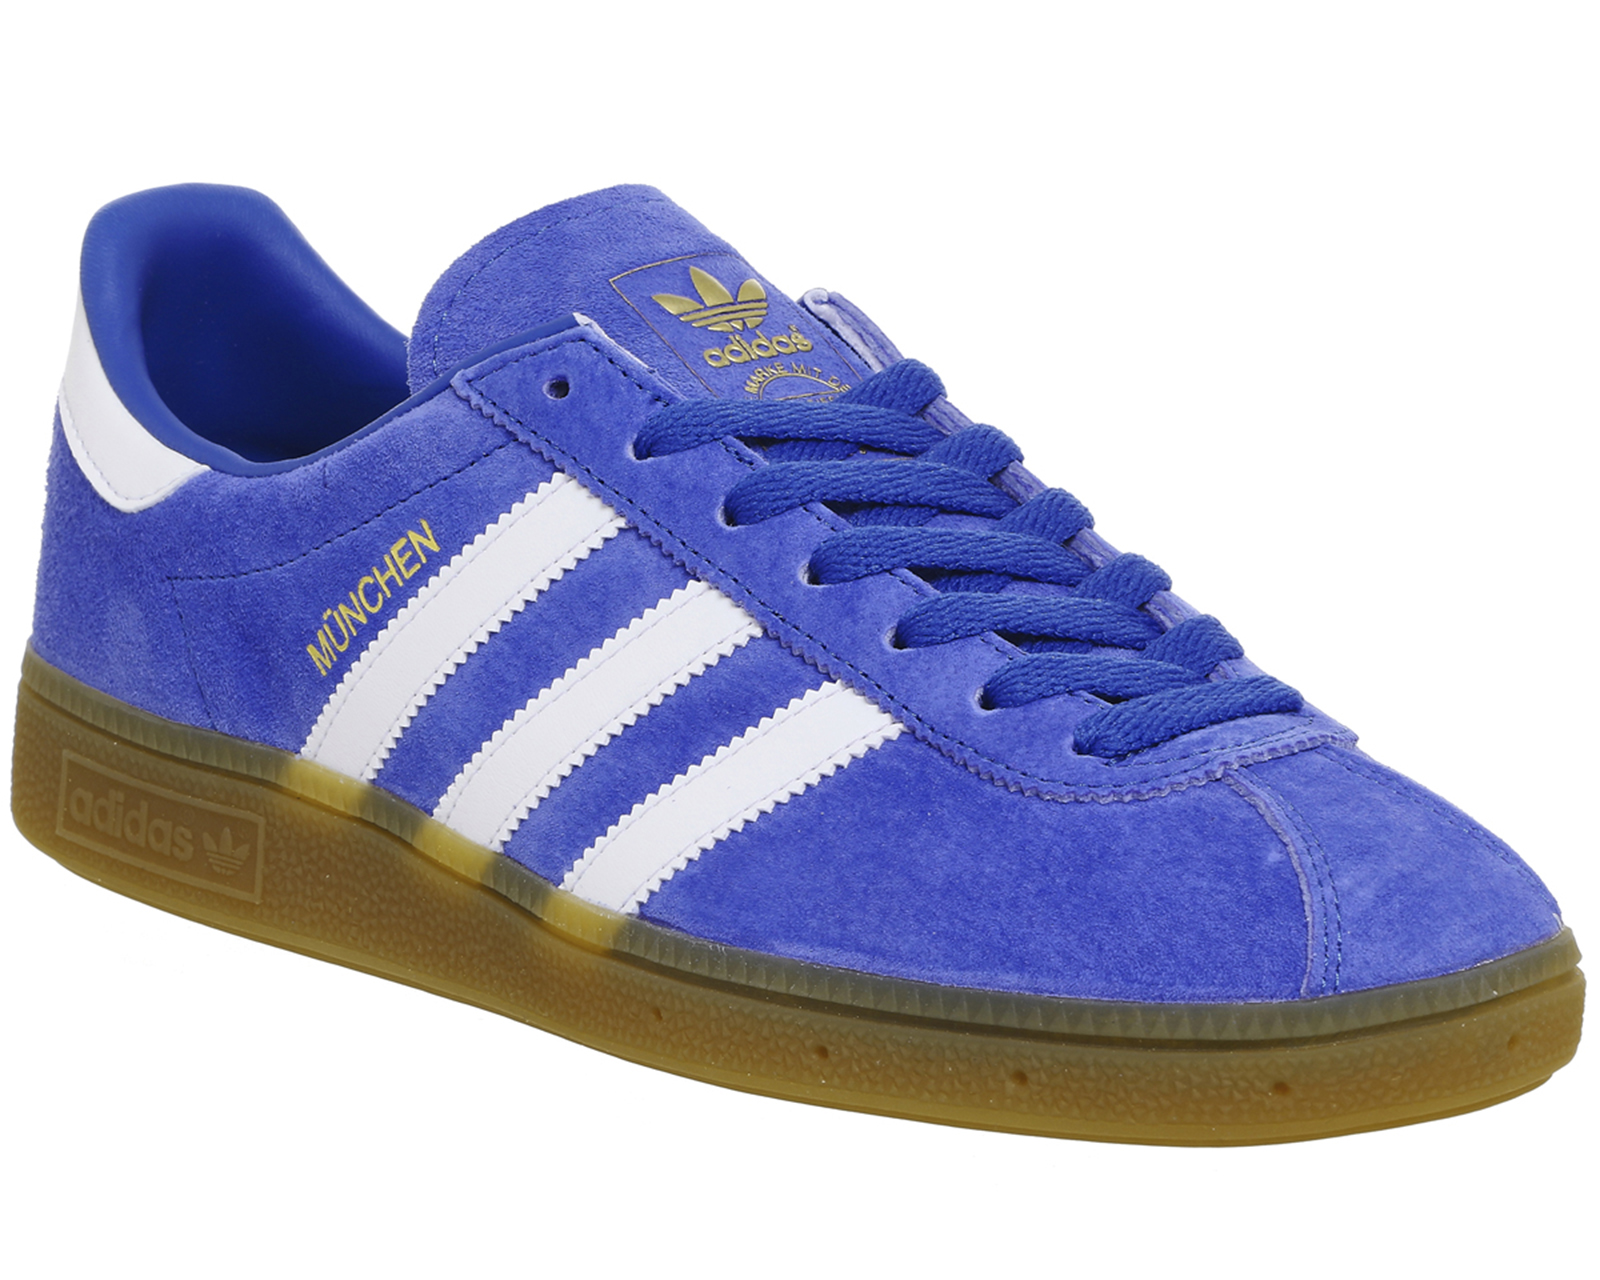 adidas Munchen Trainers Blue White Gum - His trainers